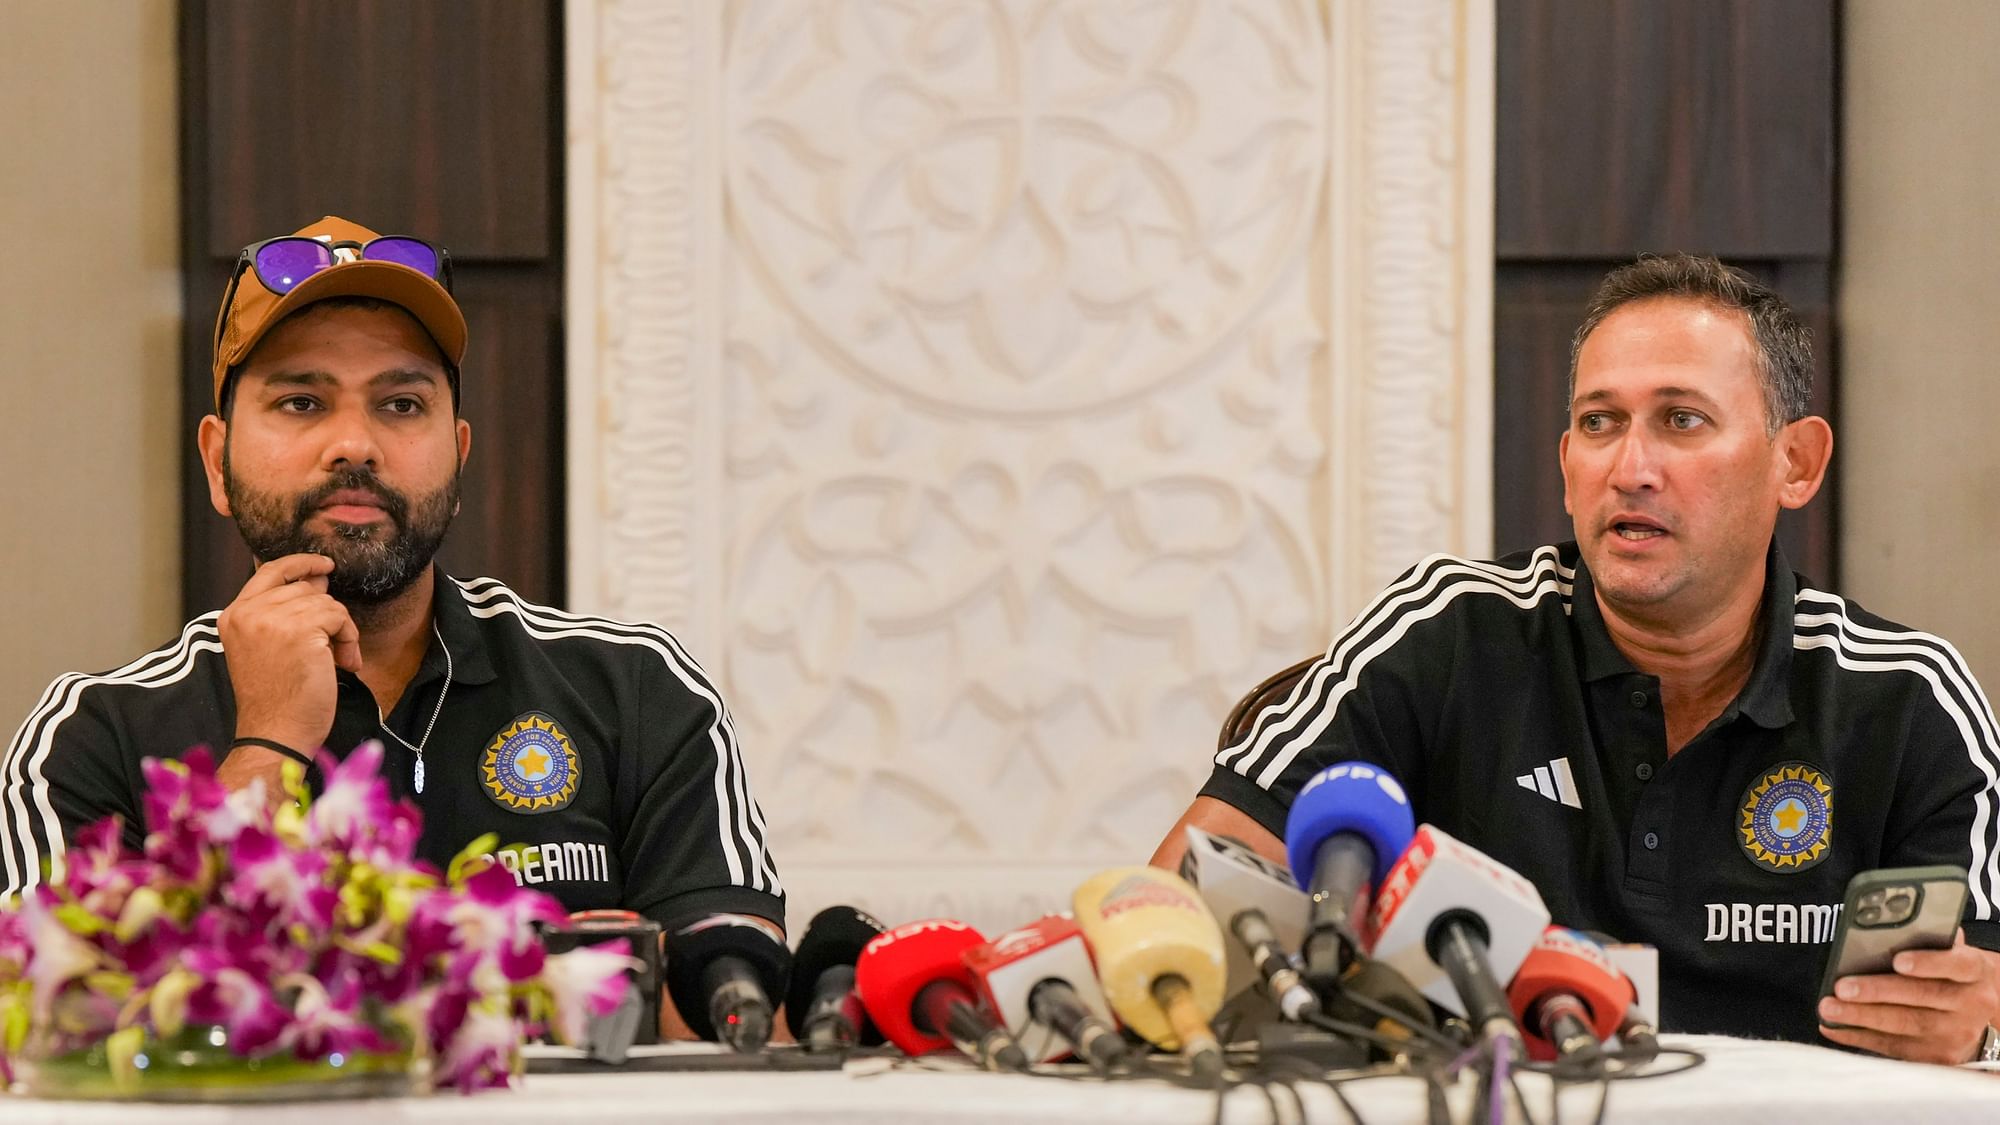 <div class="paragraphs"><p>The BCCI has announced the 17 member squad for the 2023 Asia Cup. Skipper Rohit Sharma and chief selector Ajit Agarkar at the press conference to announce the squad in New Delhi on 21 August.</p></div>